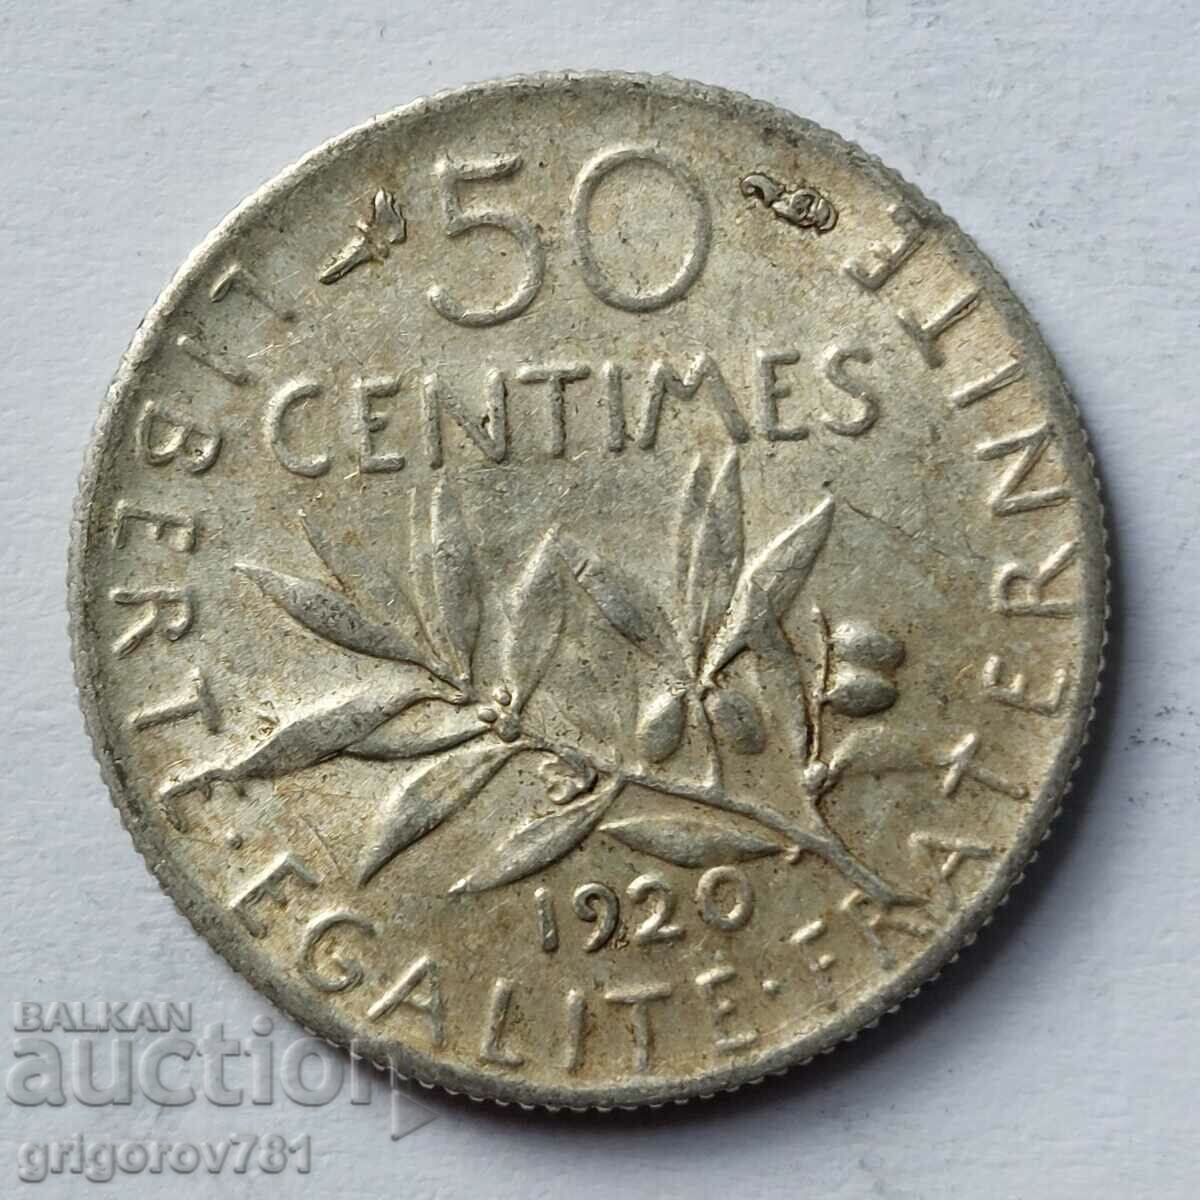 50 centimes silver France 1920 - silver coin №30